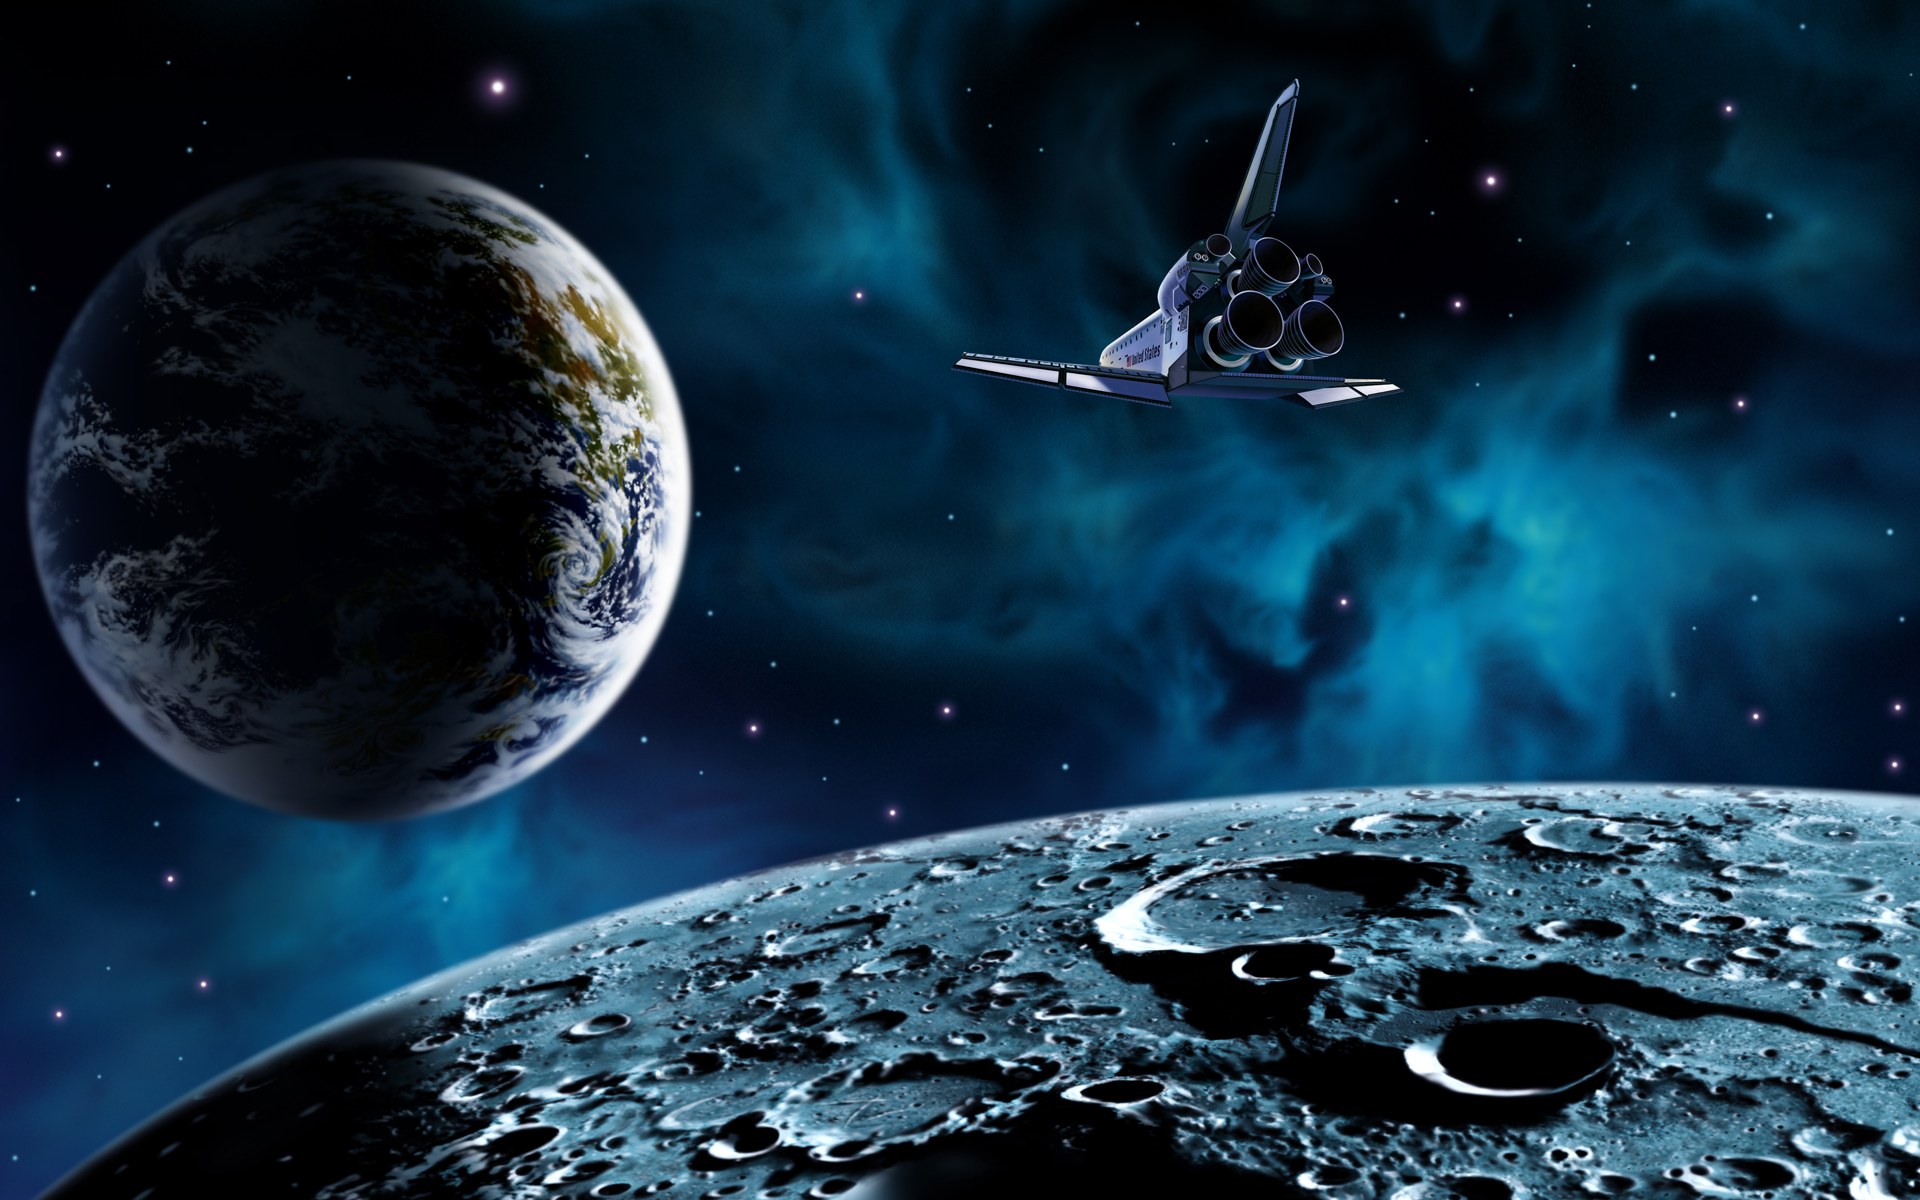 tags space art space art satellite date 10 10 09 resolution 1920x1200